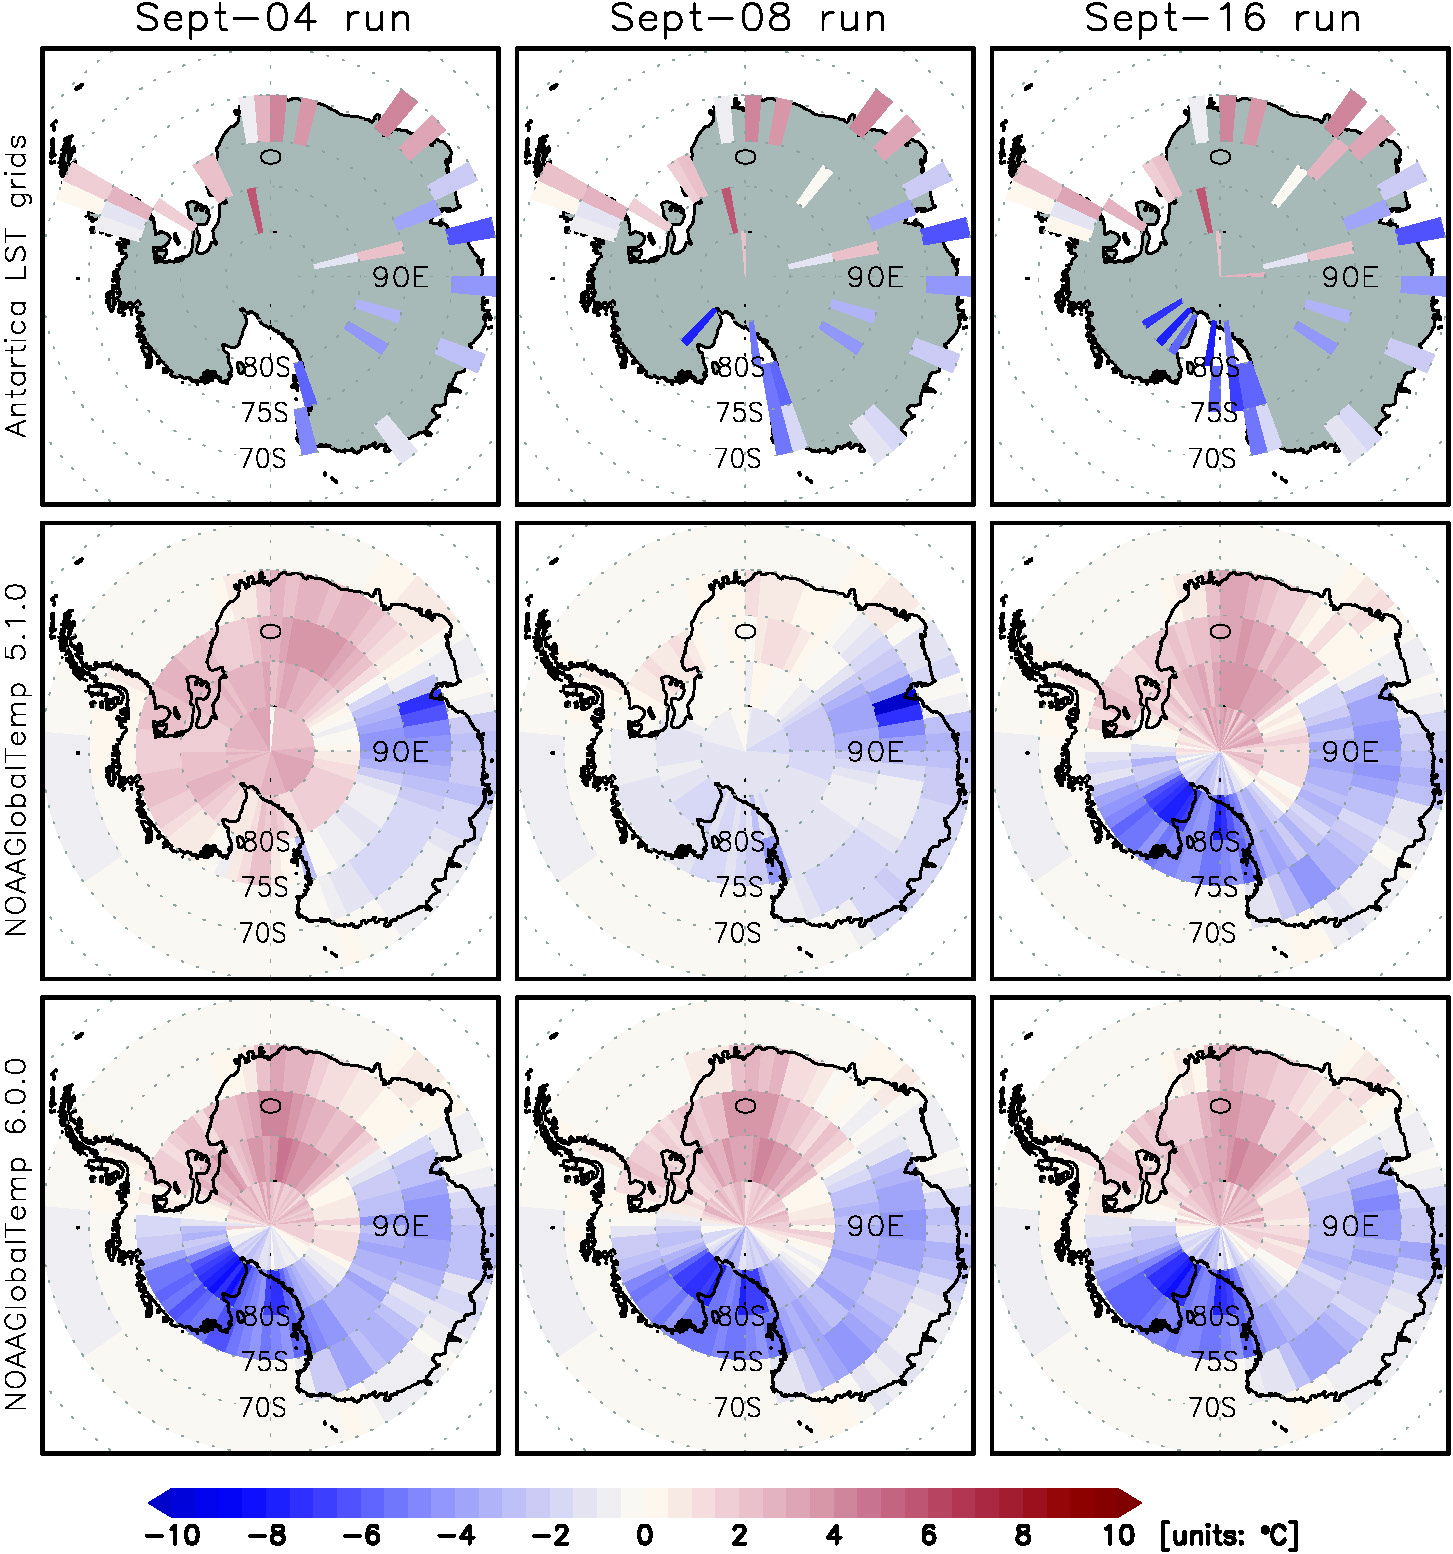 The data of the August 2023 NOAAGlobalTemp in Antarctica generated on three days, September 4, 8, and 16, 2023, are respectively displayed in columns 1-3. Top row: input observation data; middle row: data reconstruction by EOT; bottom row: data reconstruction by ANN. In the Sept-04 run, there were no observations in this area due to data delay. In the next two runs, Sept-08 and Sept-16, the number of observations gradually increased. This result exemplifies the robustness of the ANN approach, which works reliably even in observation-sparse areas. 